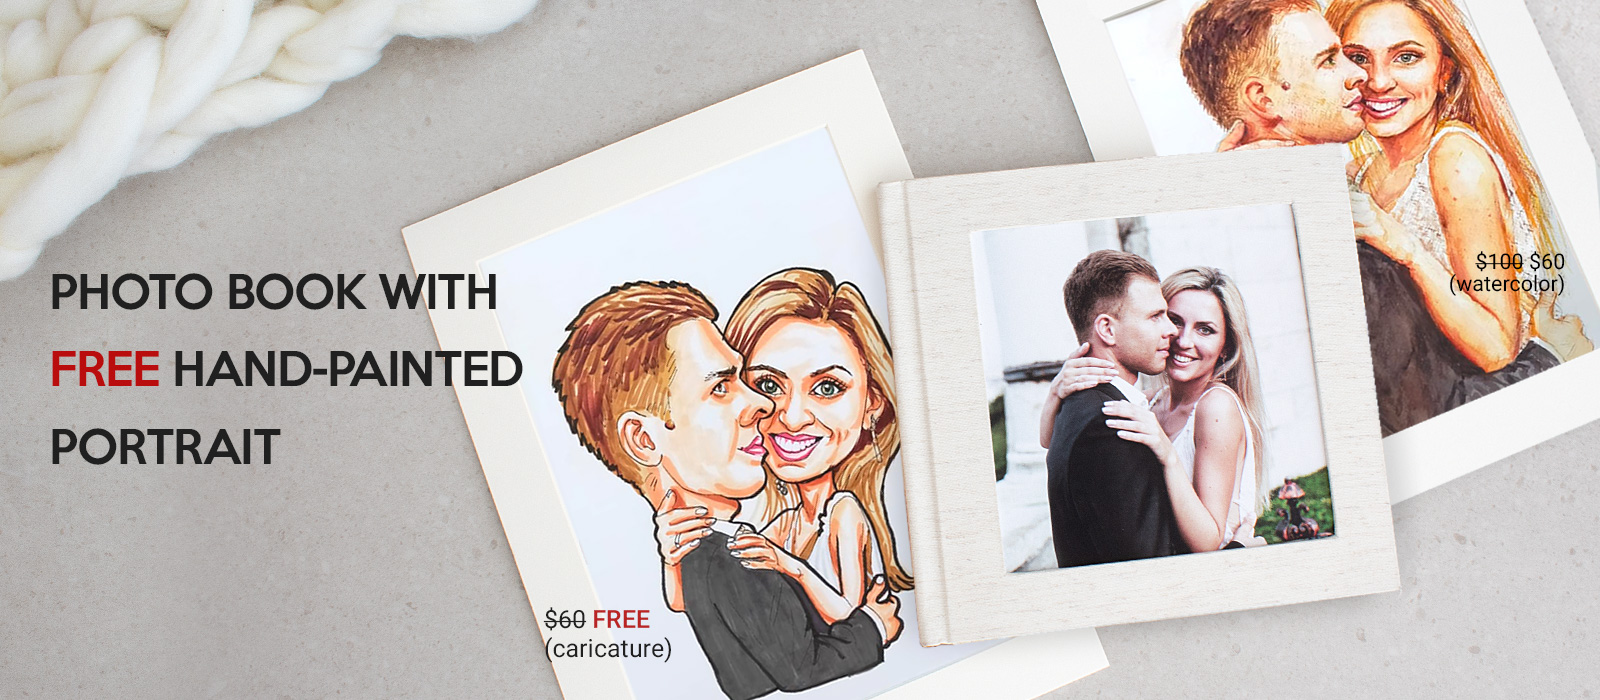 We recreate you in watercolor for Free